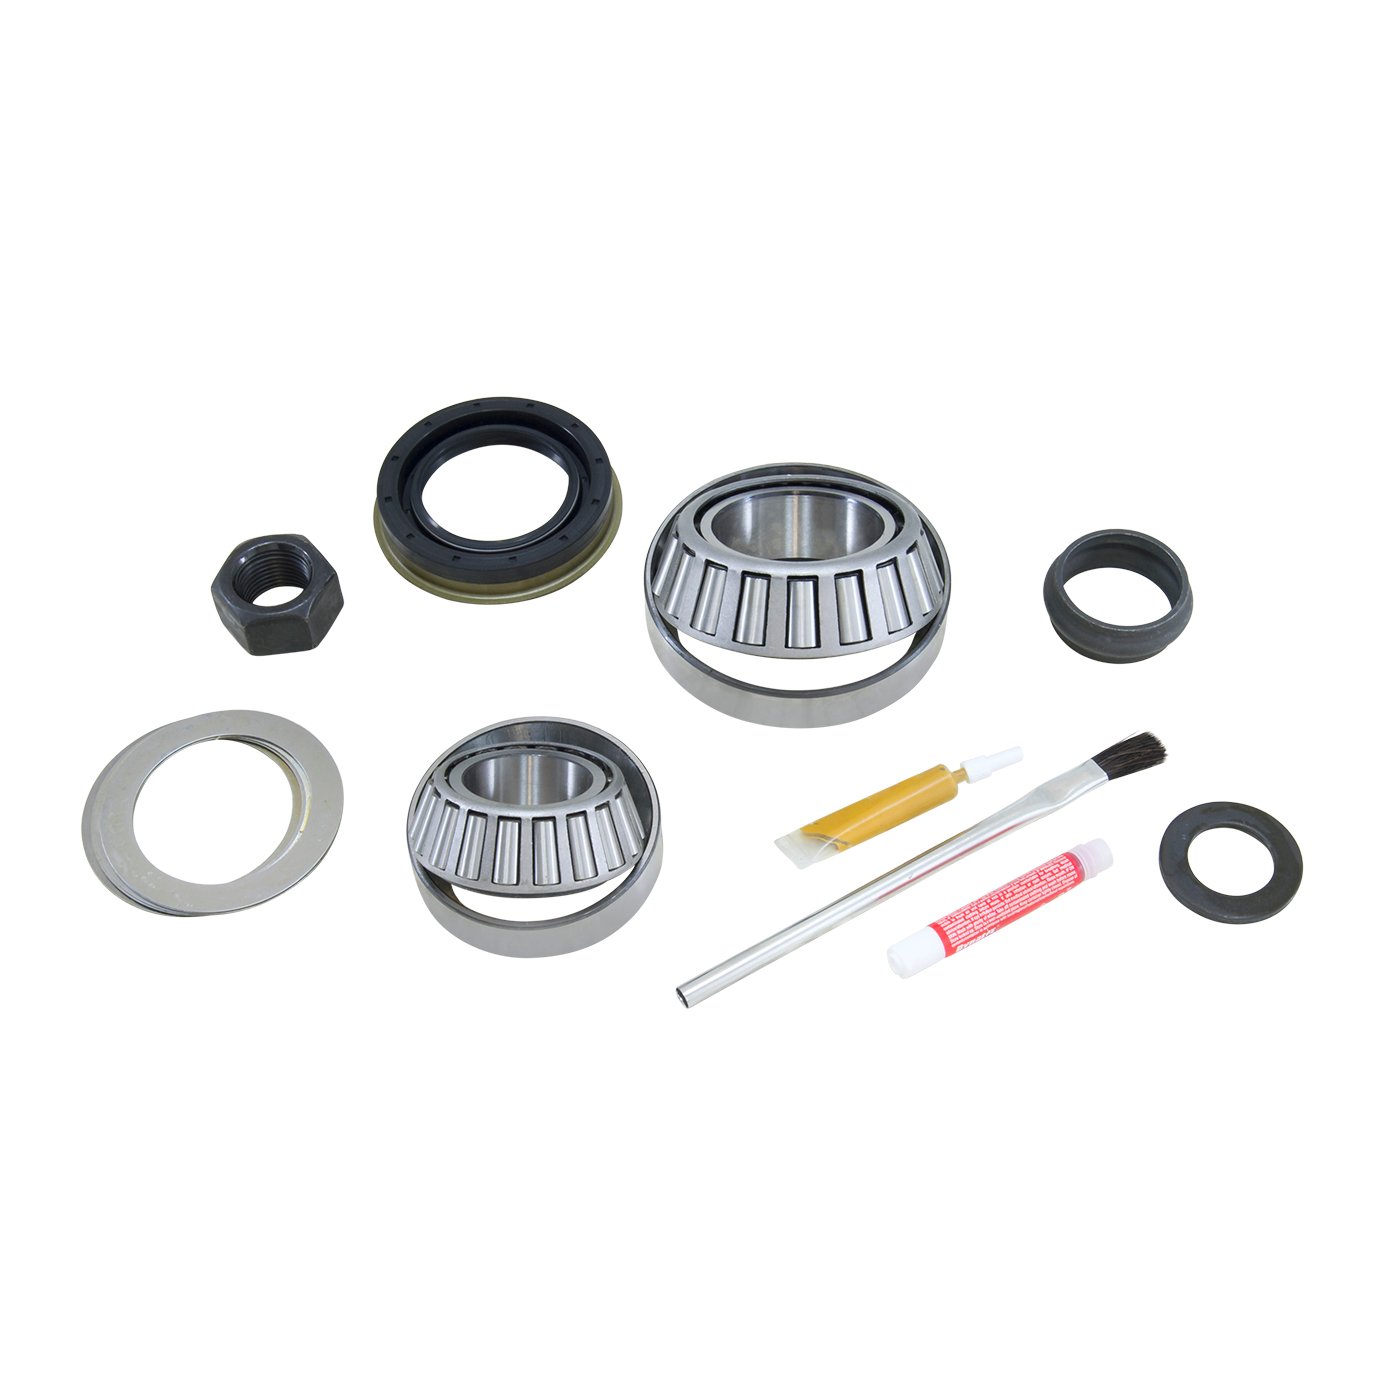 Pinion Install Kit For '03 & Up Chrysler 8 in. Ifs Differential.